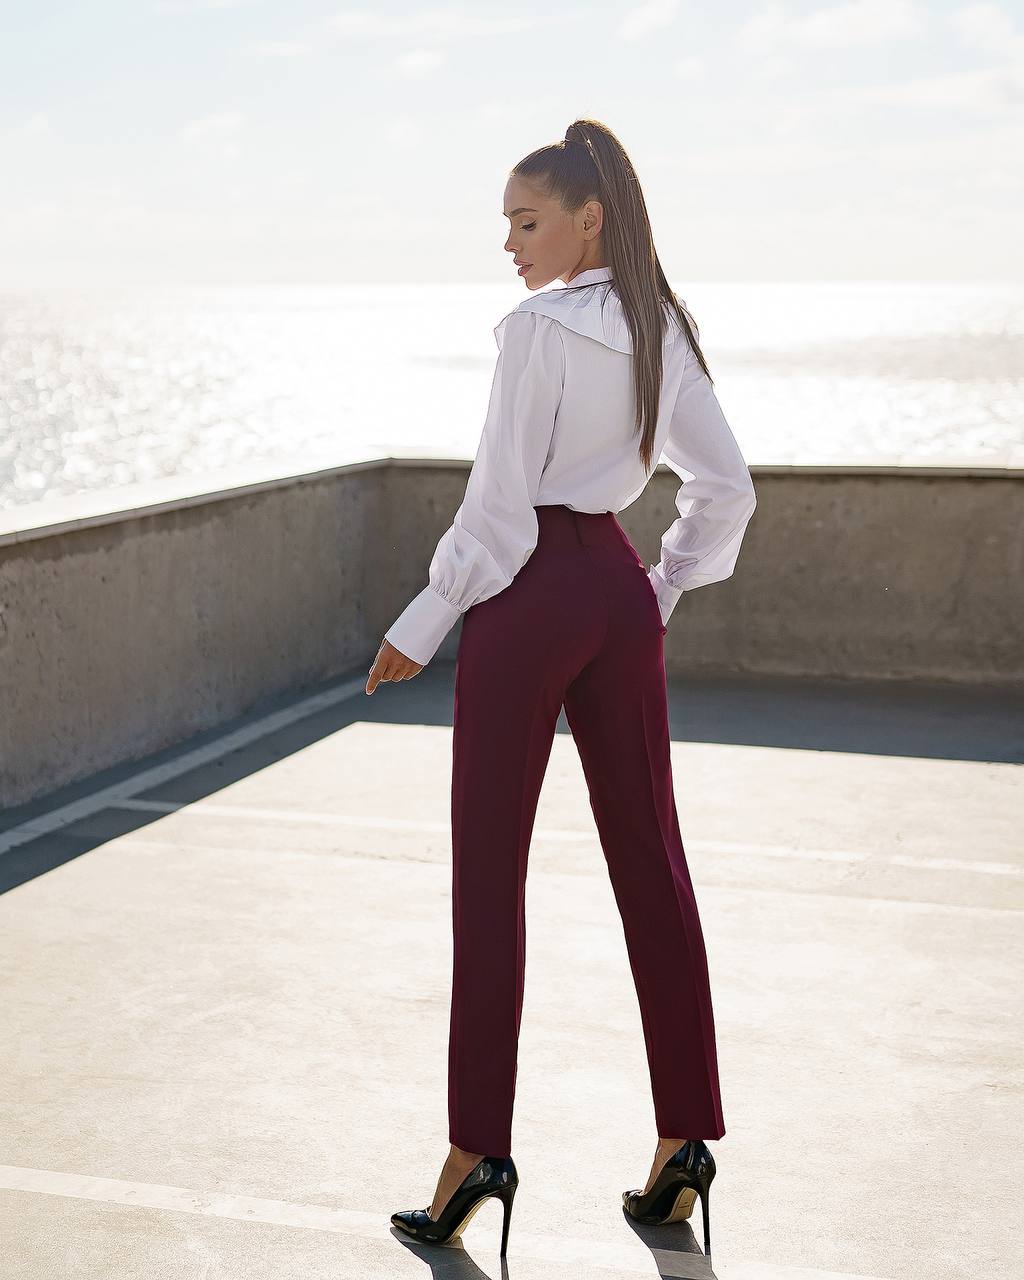 a woman in a white shirt and maroon pants